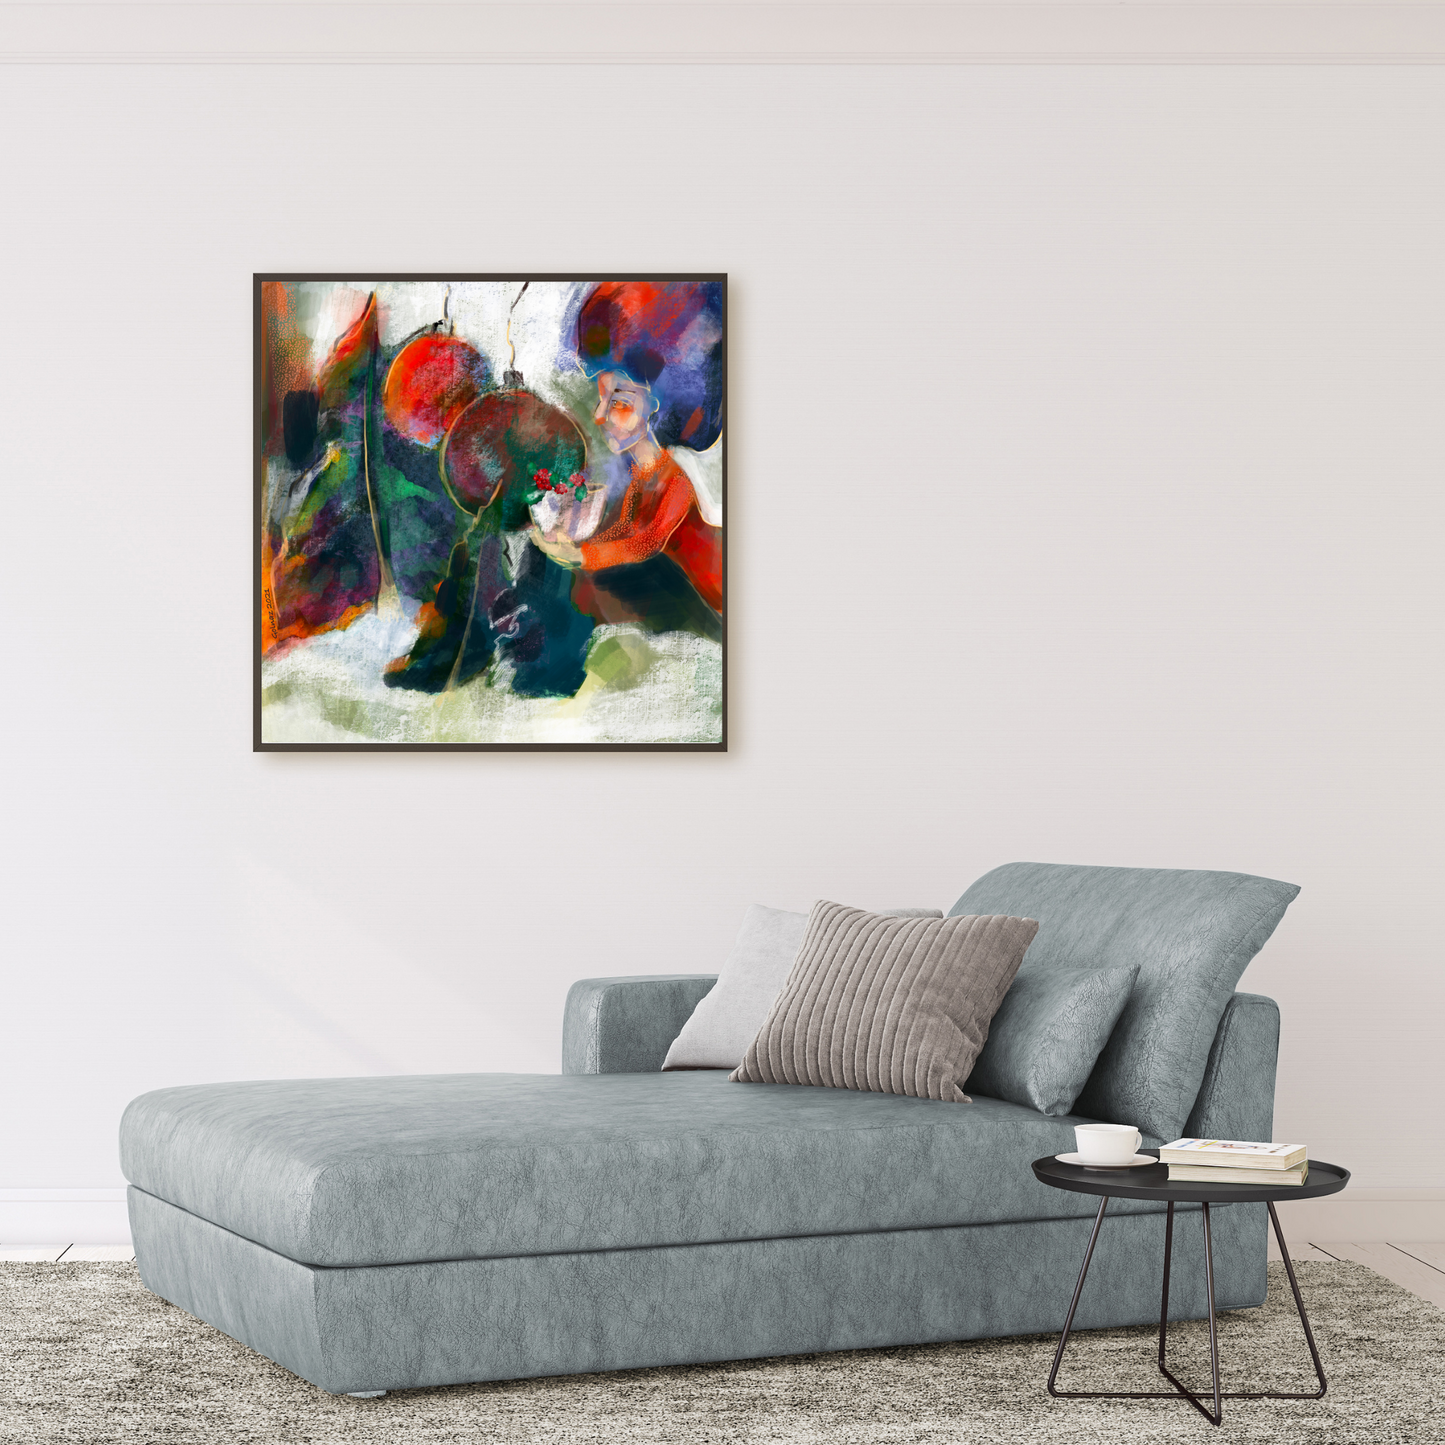 An example of the figurative "Christmas Ornaments" painting printable by ArisaTeam over a sofa